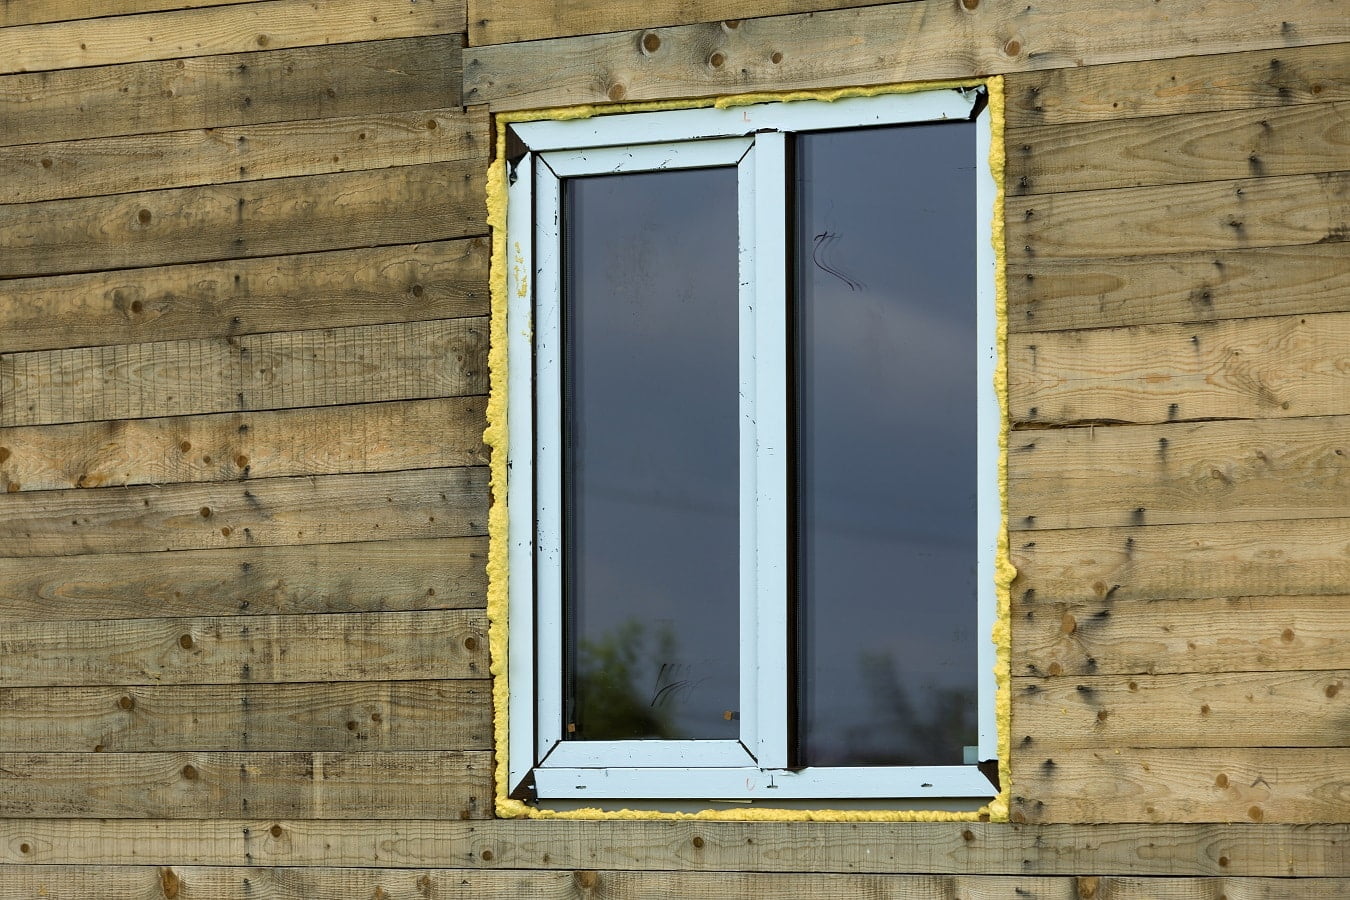 Close-up detail of new narrow plastic vinyl window installed in house wall of brown natural wooden planks and boards. Real estate property, comfortable cottage and professional construction concept.